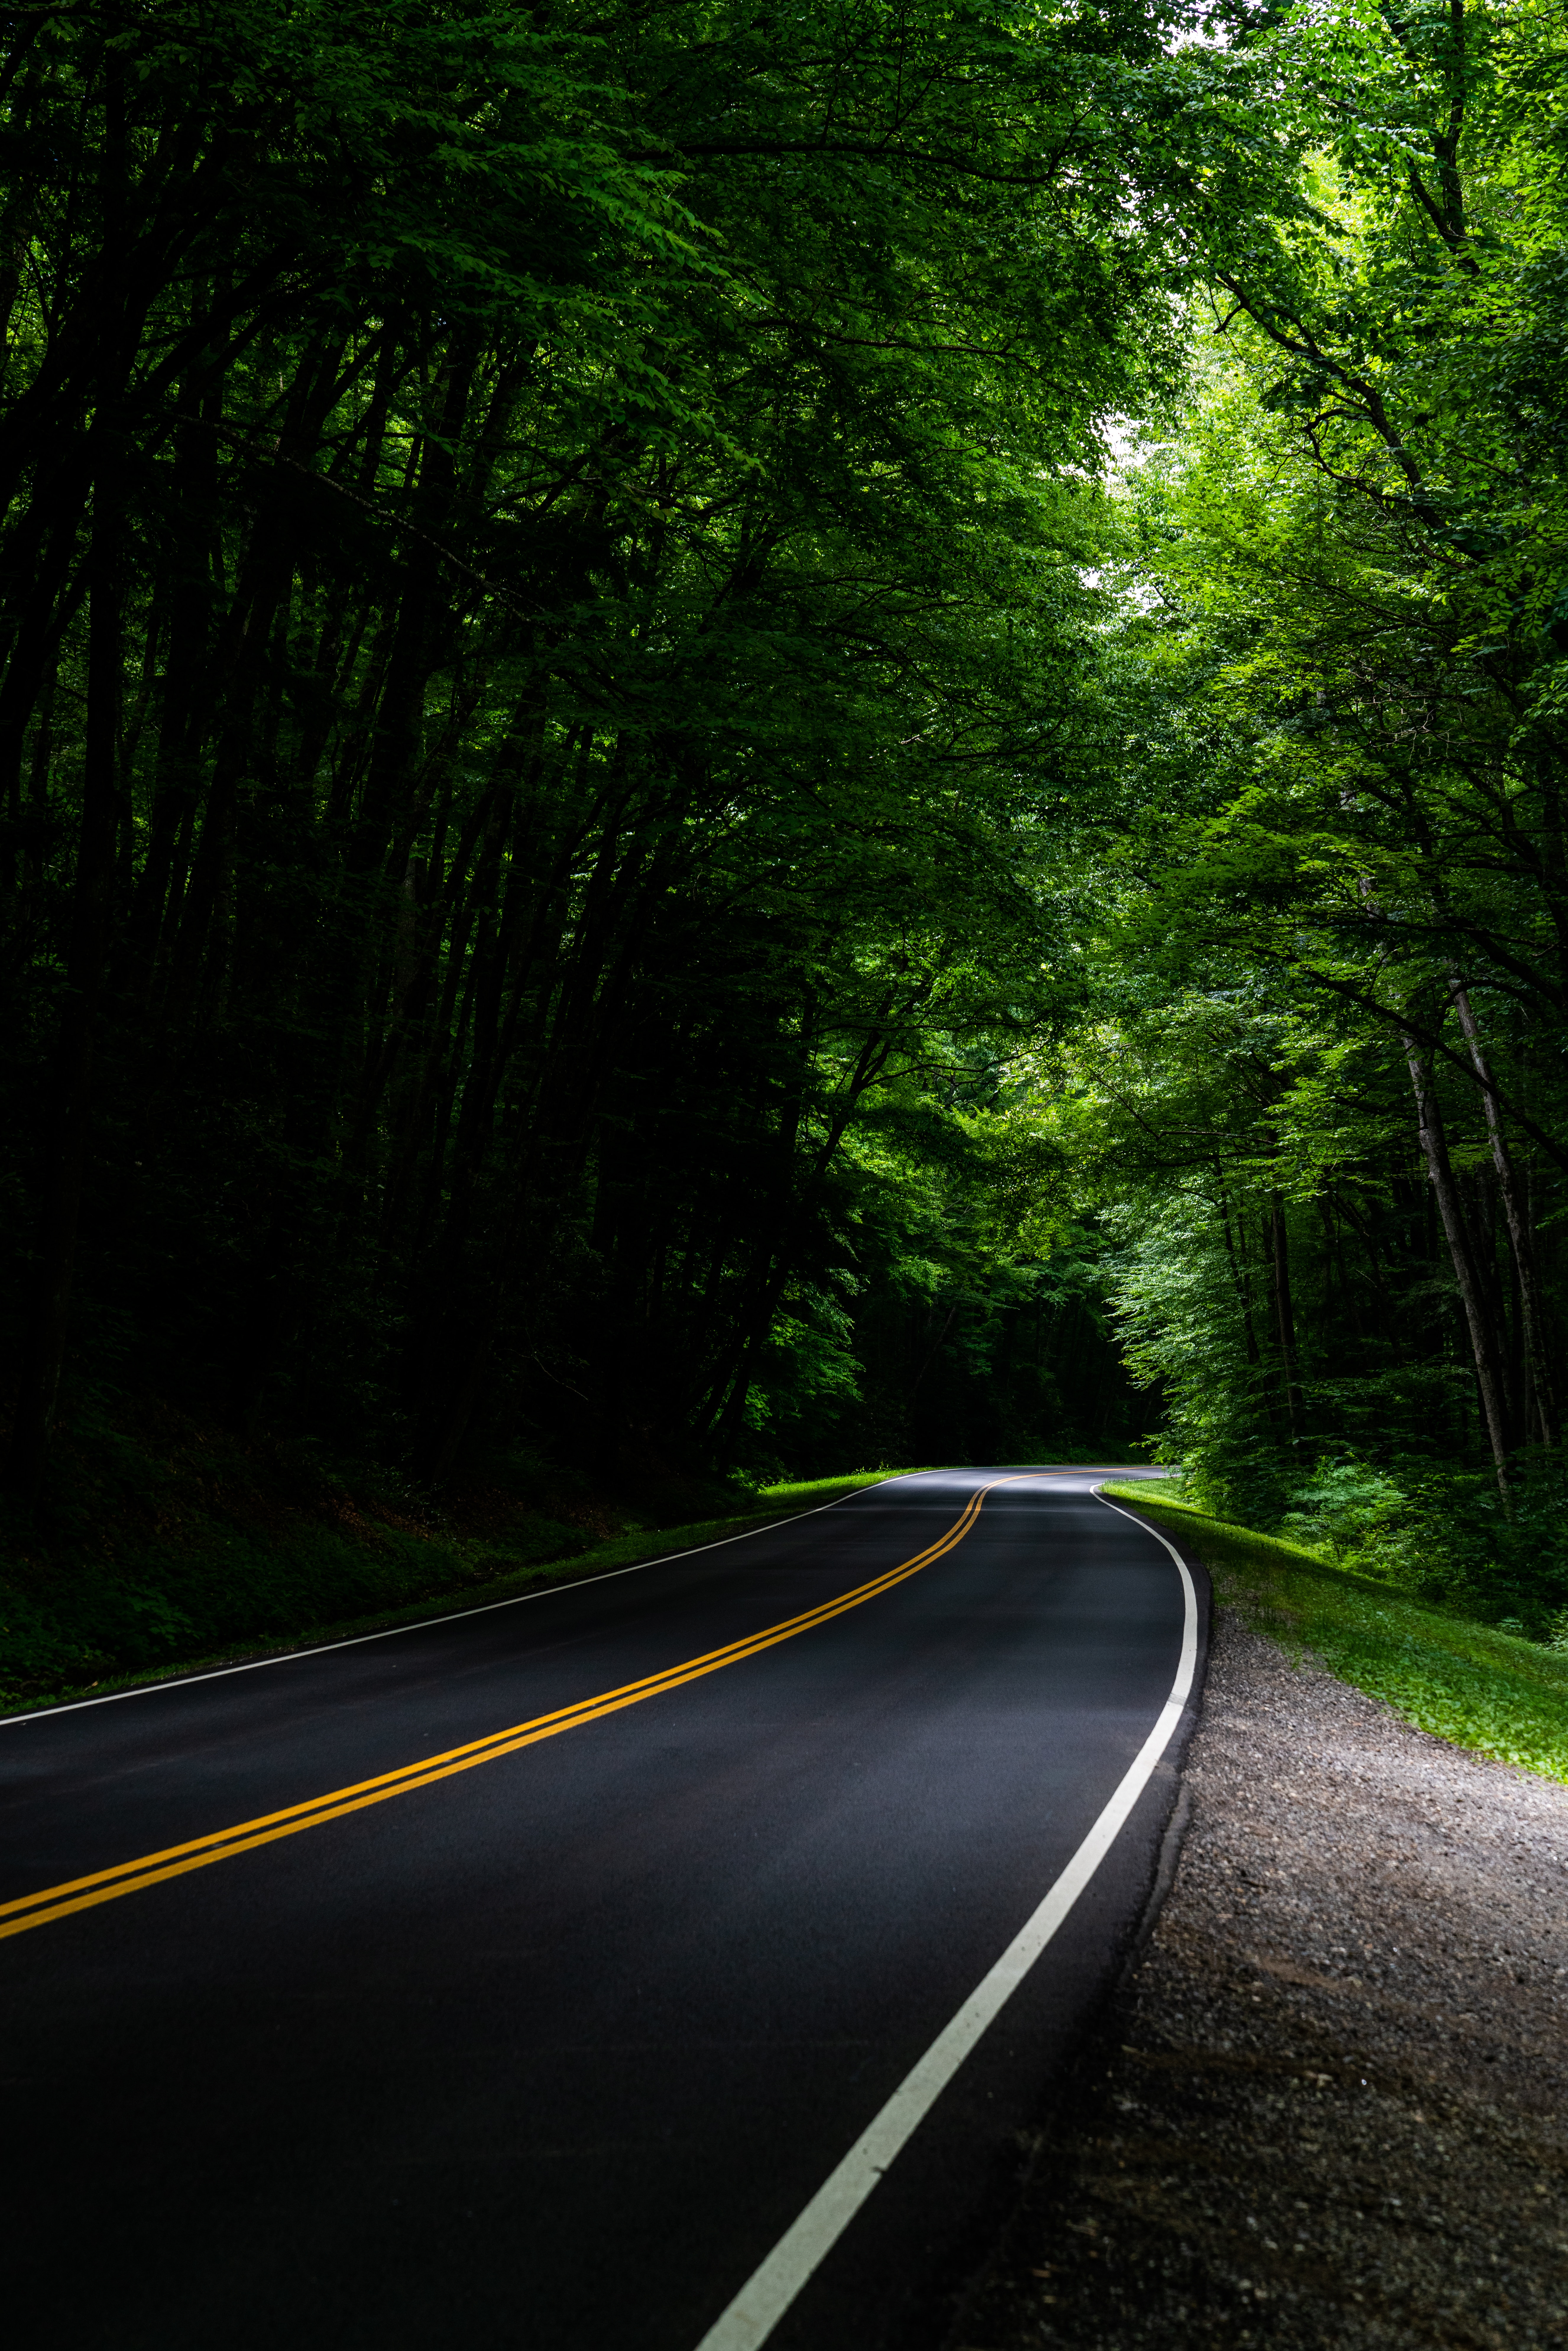 android turn, road, trees, asphalt, nature, forest